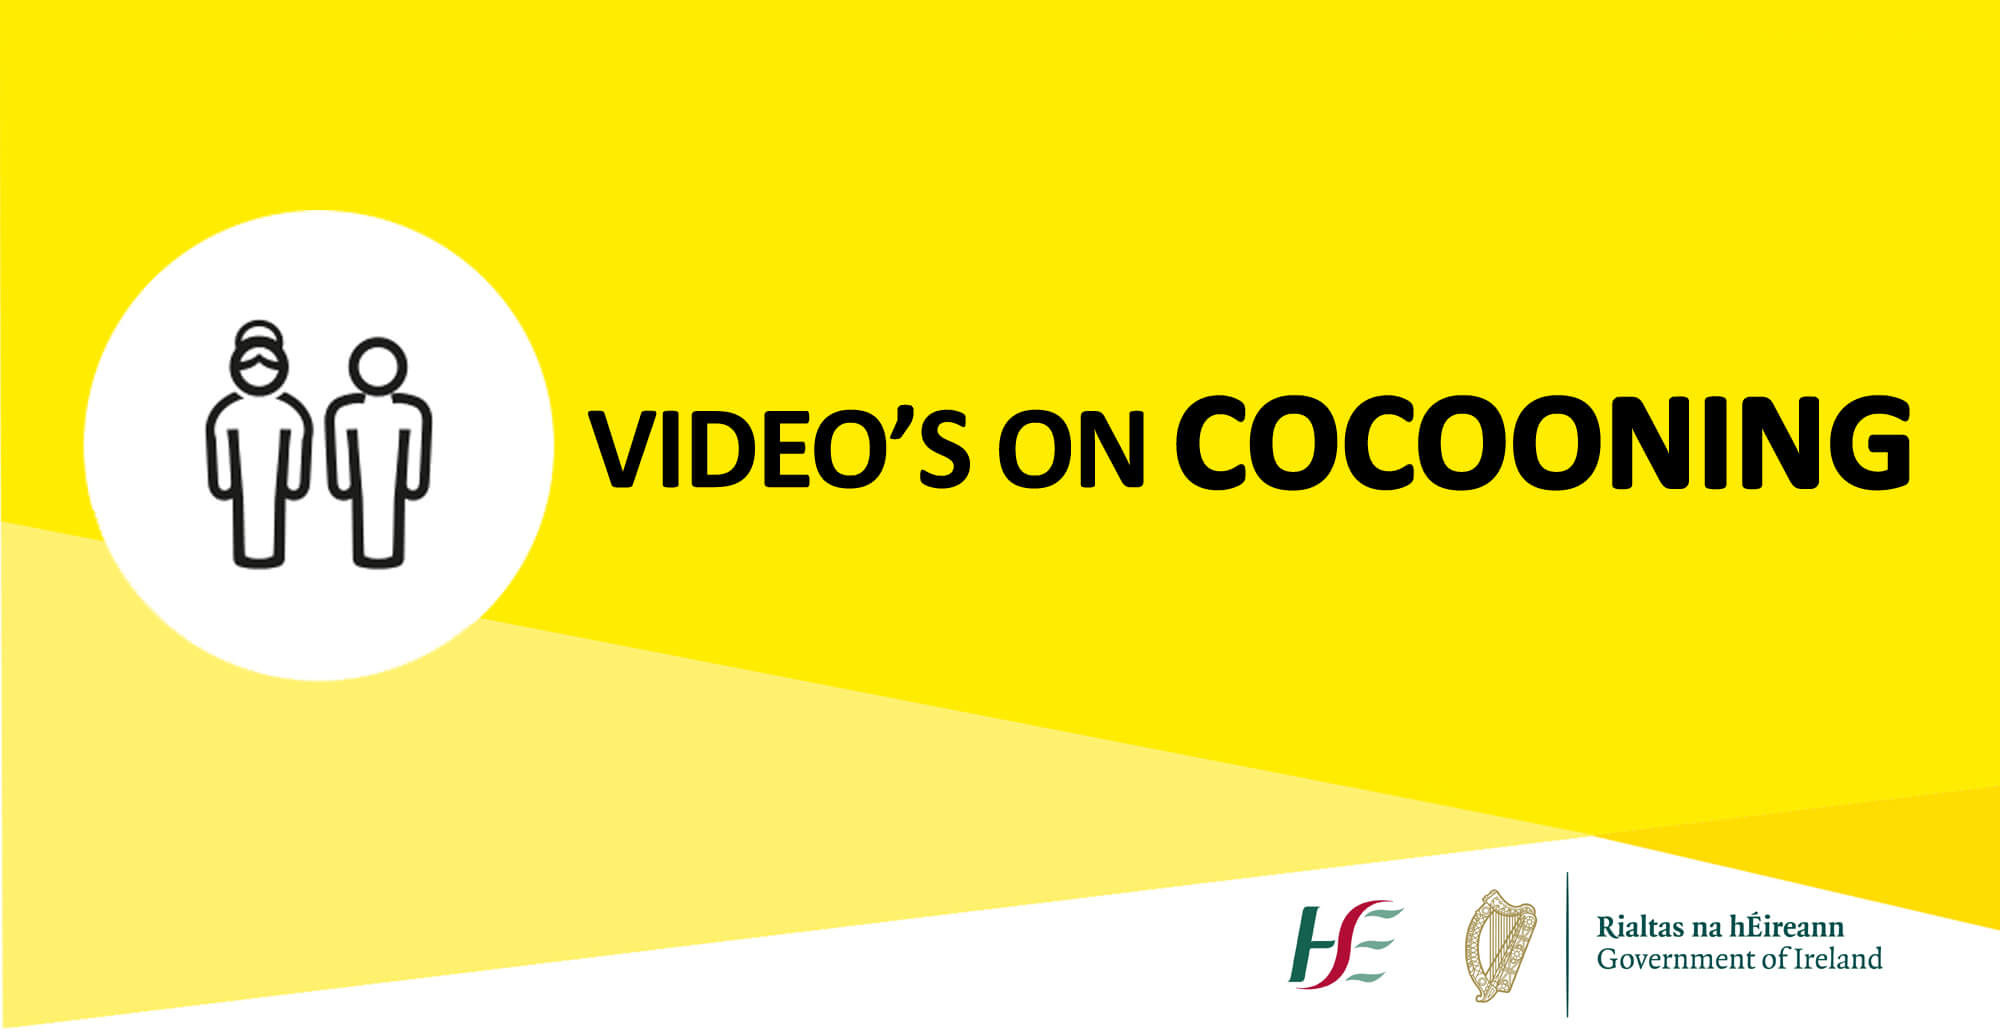 Video's on Cocooning